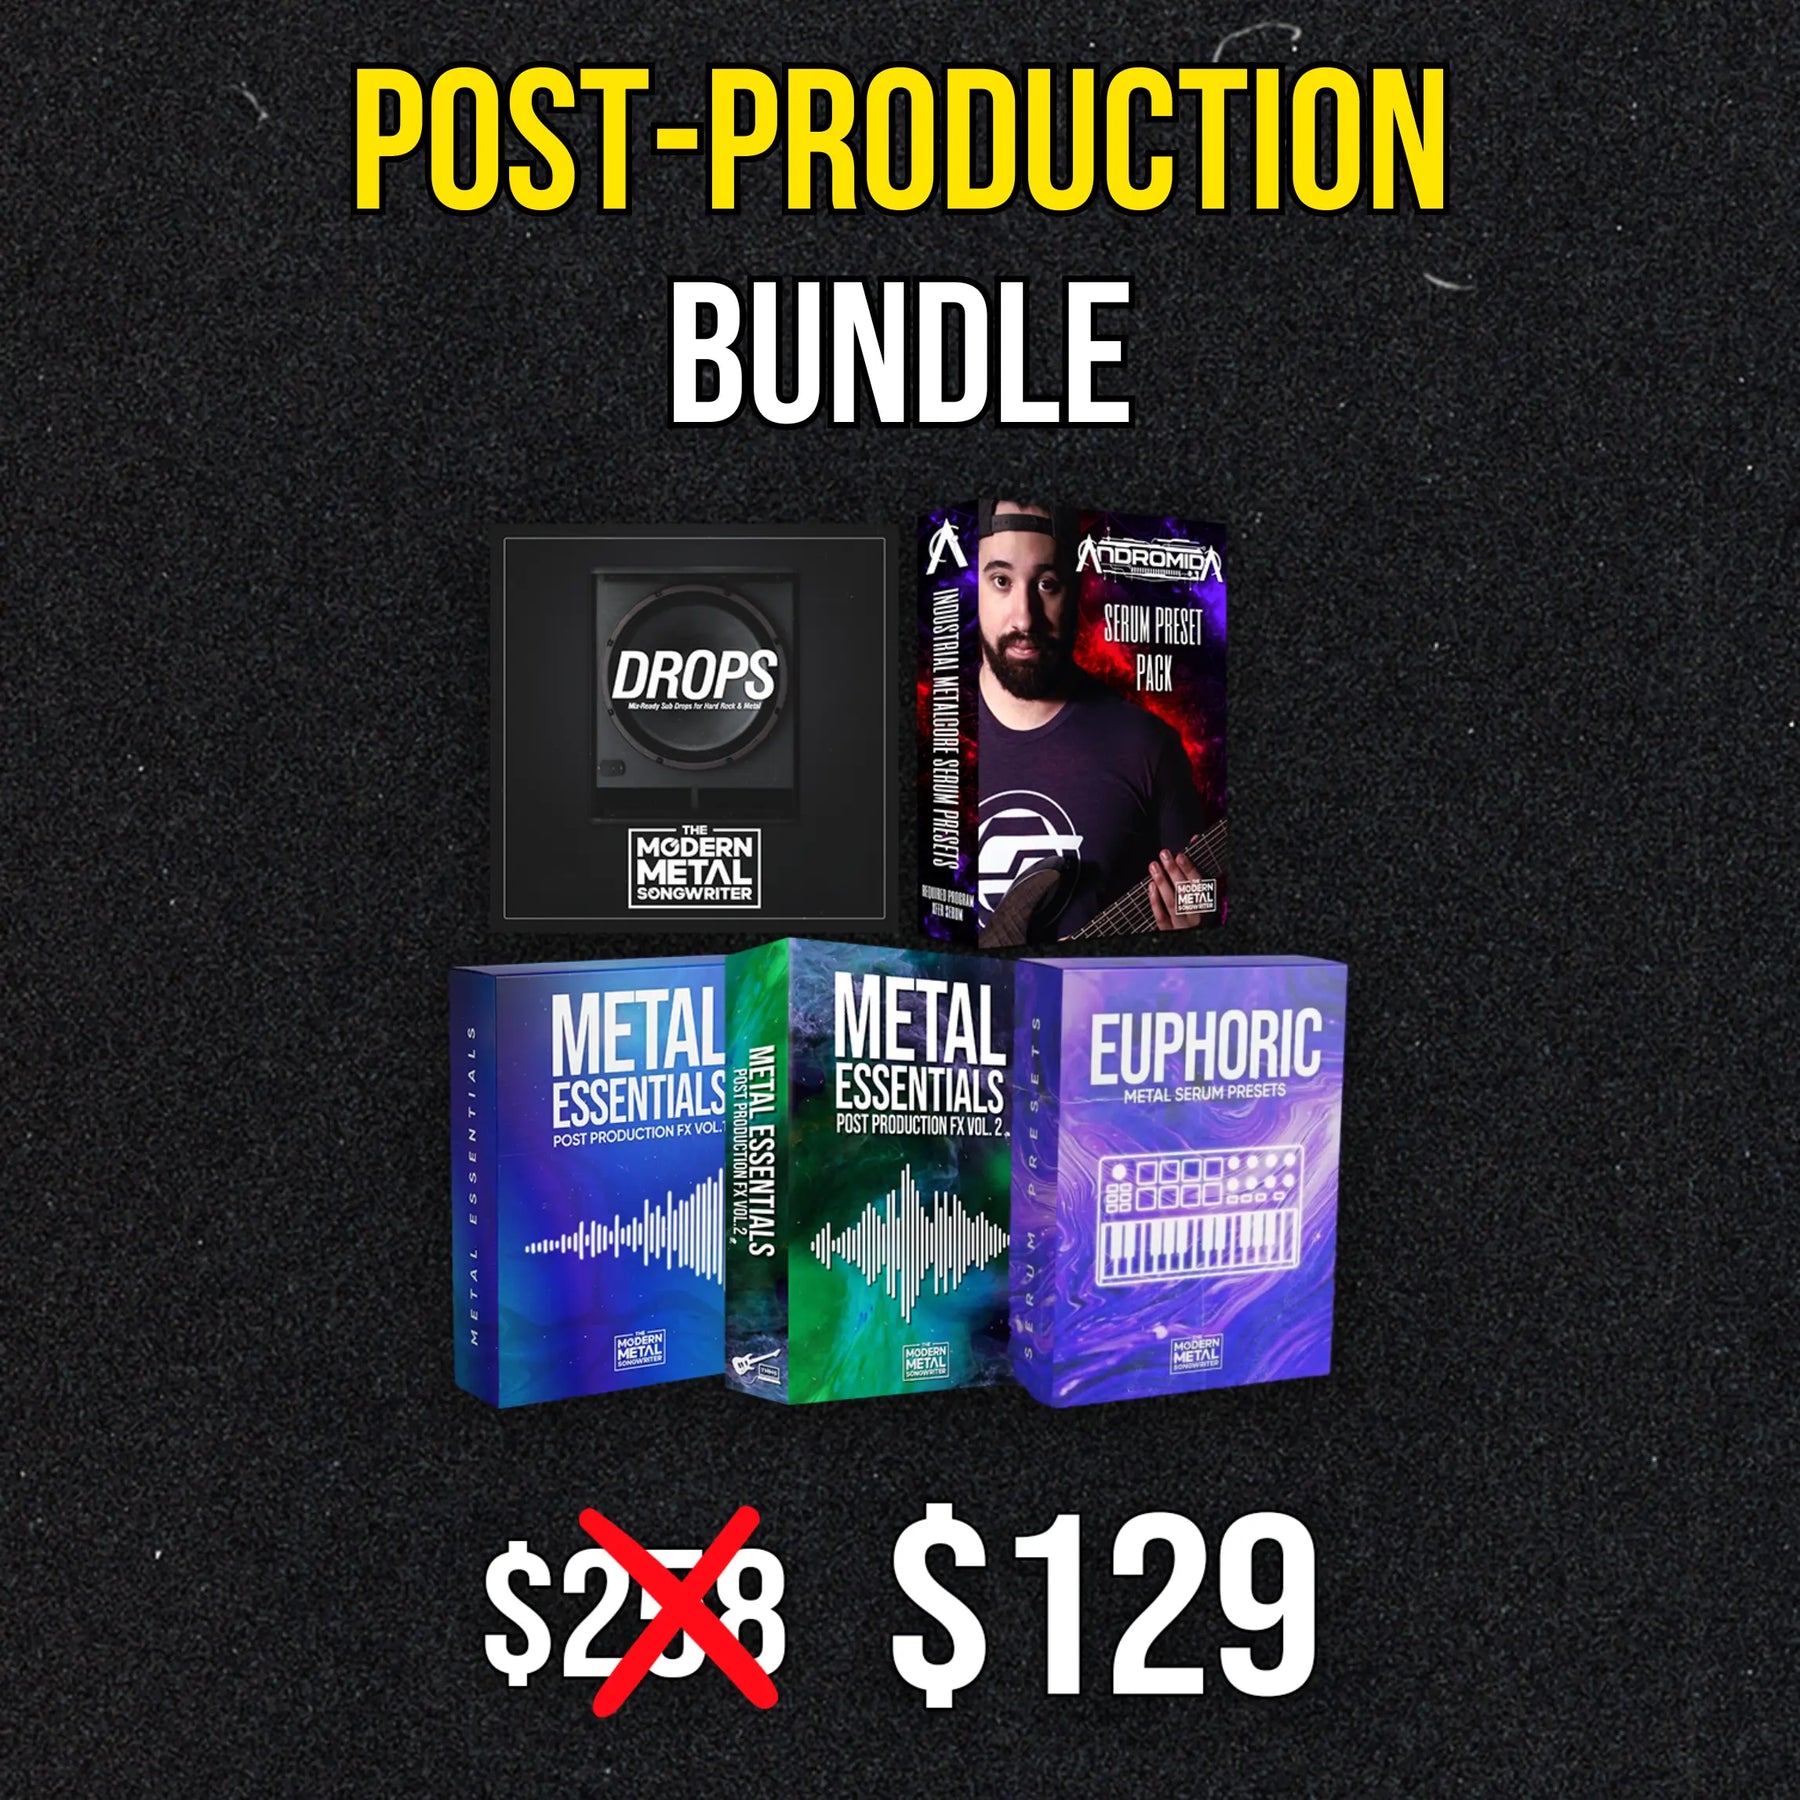 Post-Production Bundle ModernMetalSongwriter